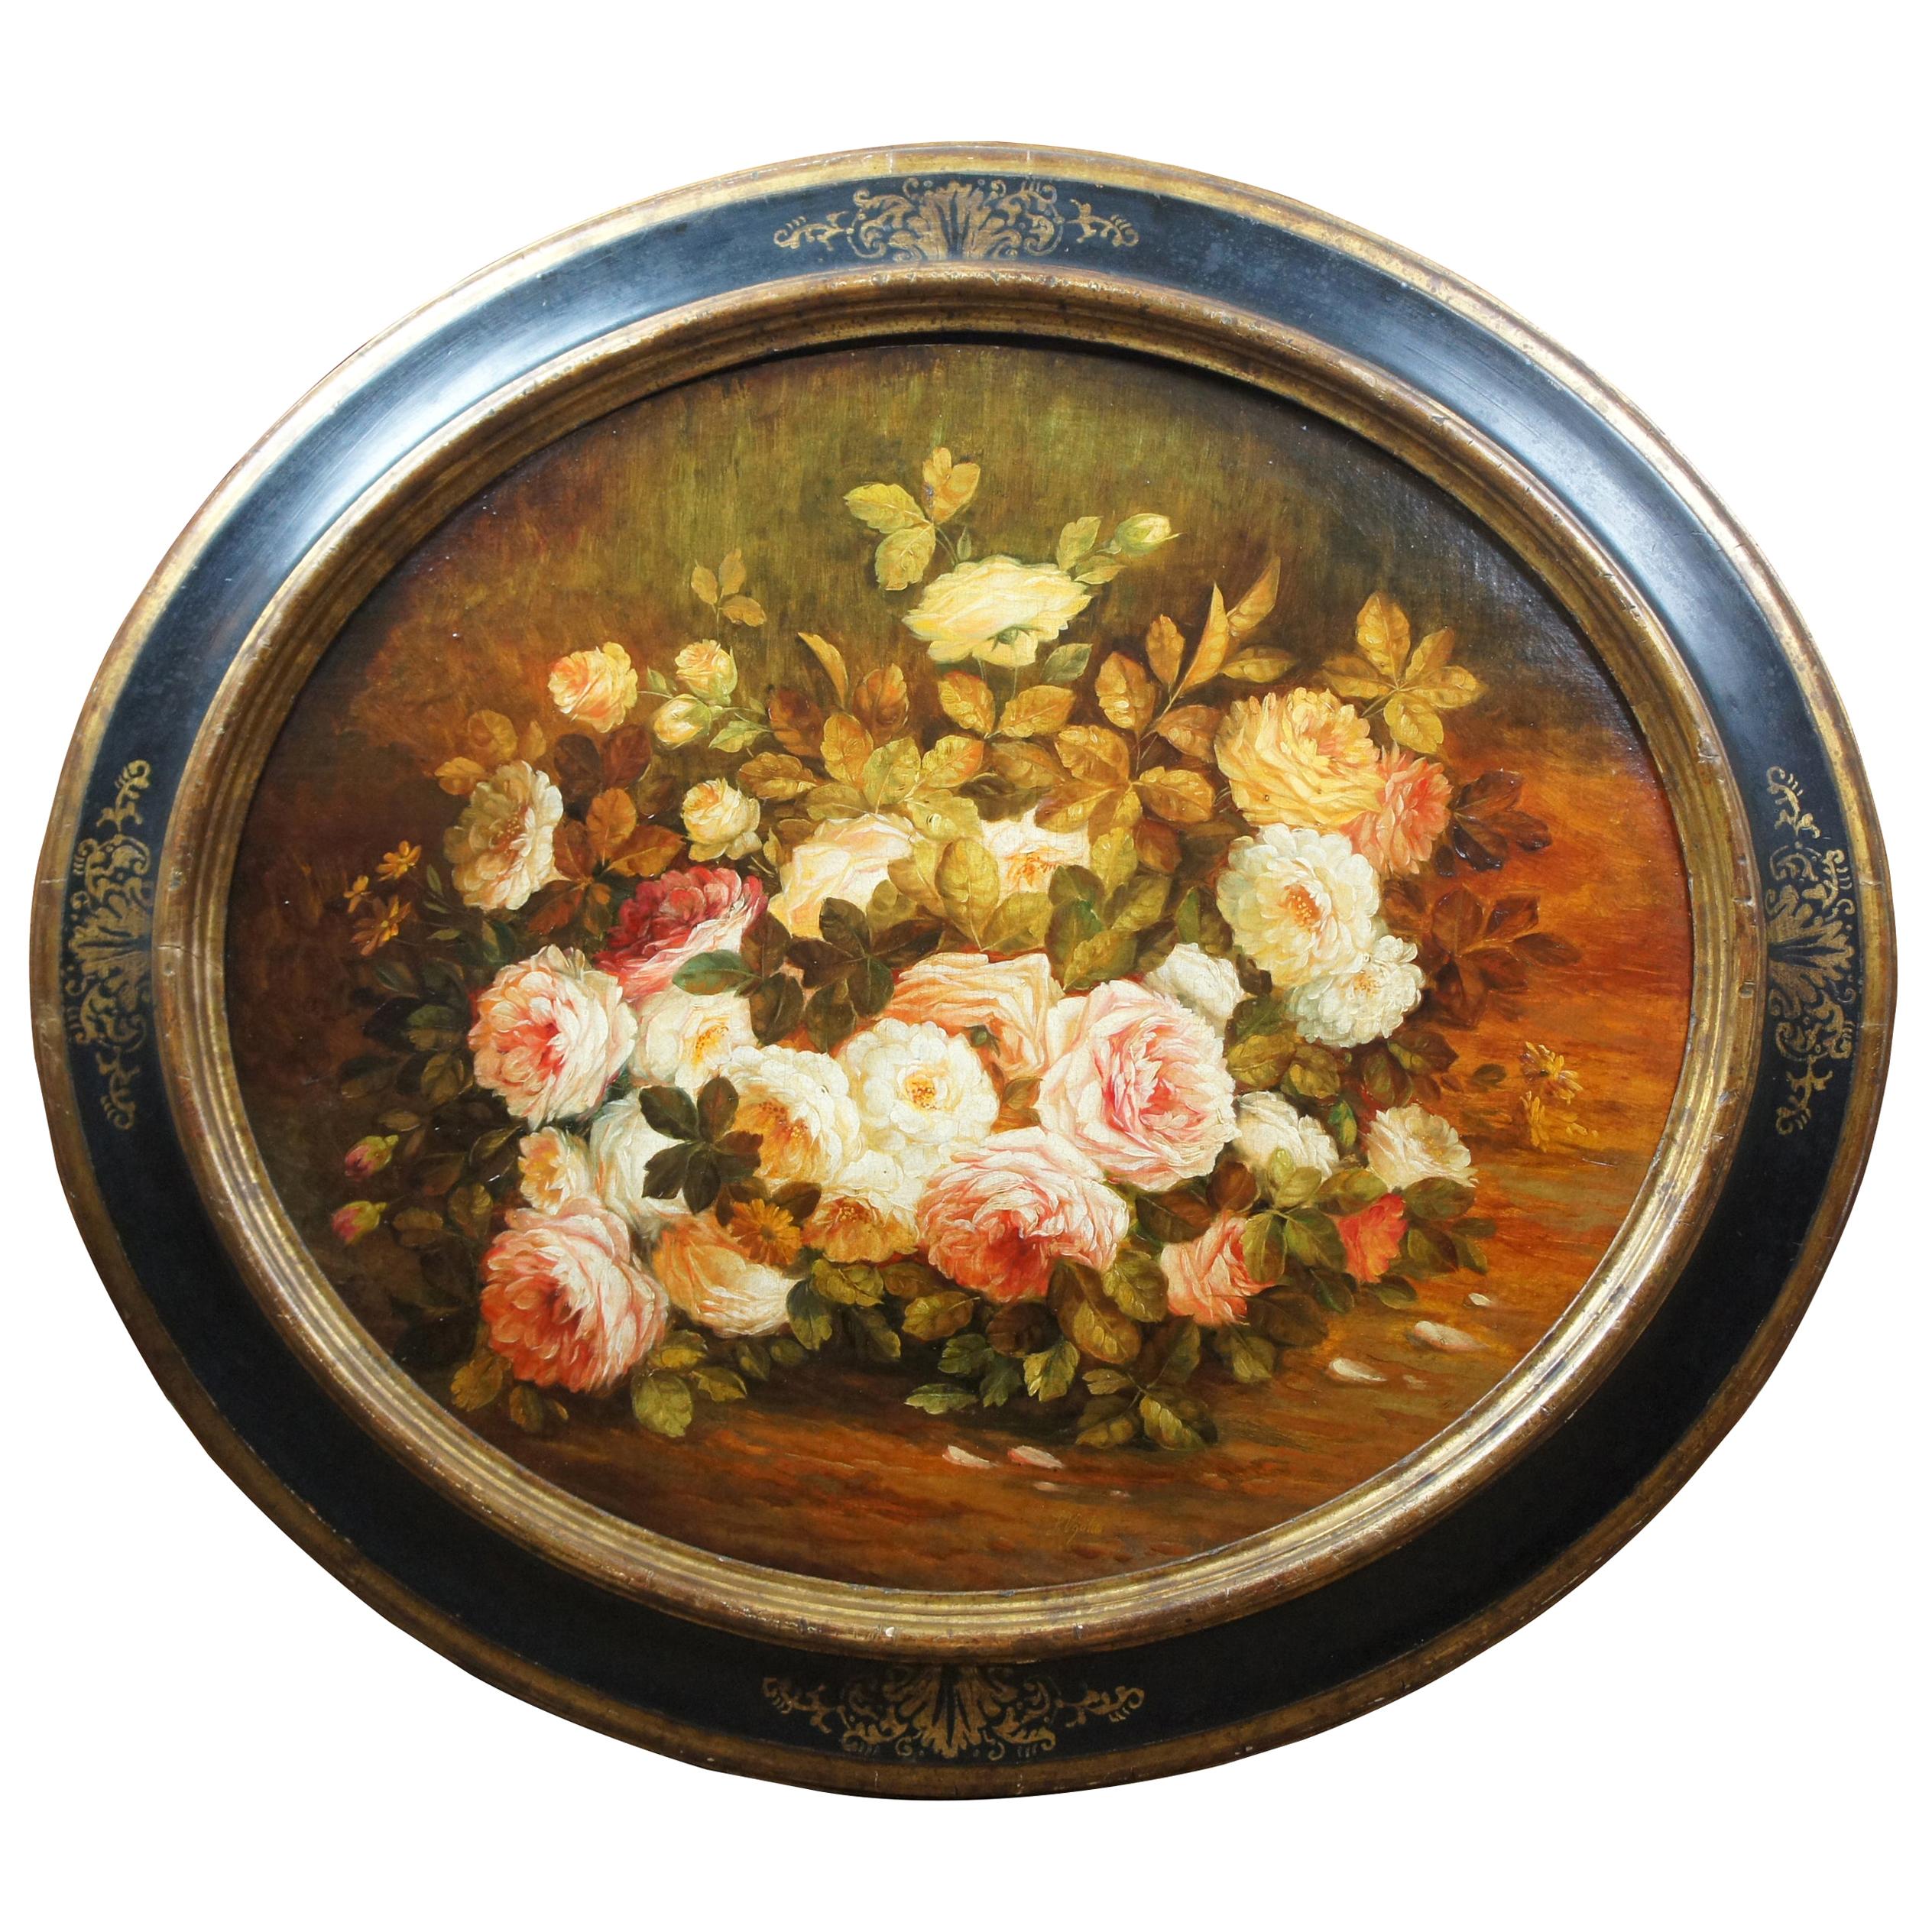 Antique Oval Floral Still Life Oil Painting on Canvas by F. Vgolini Italian